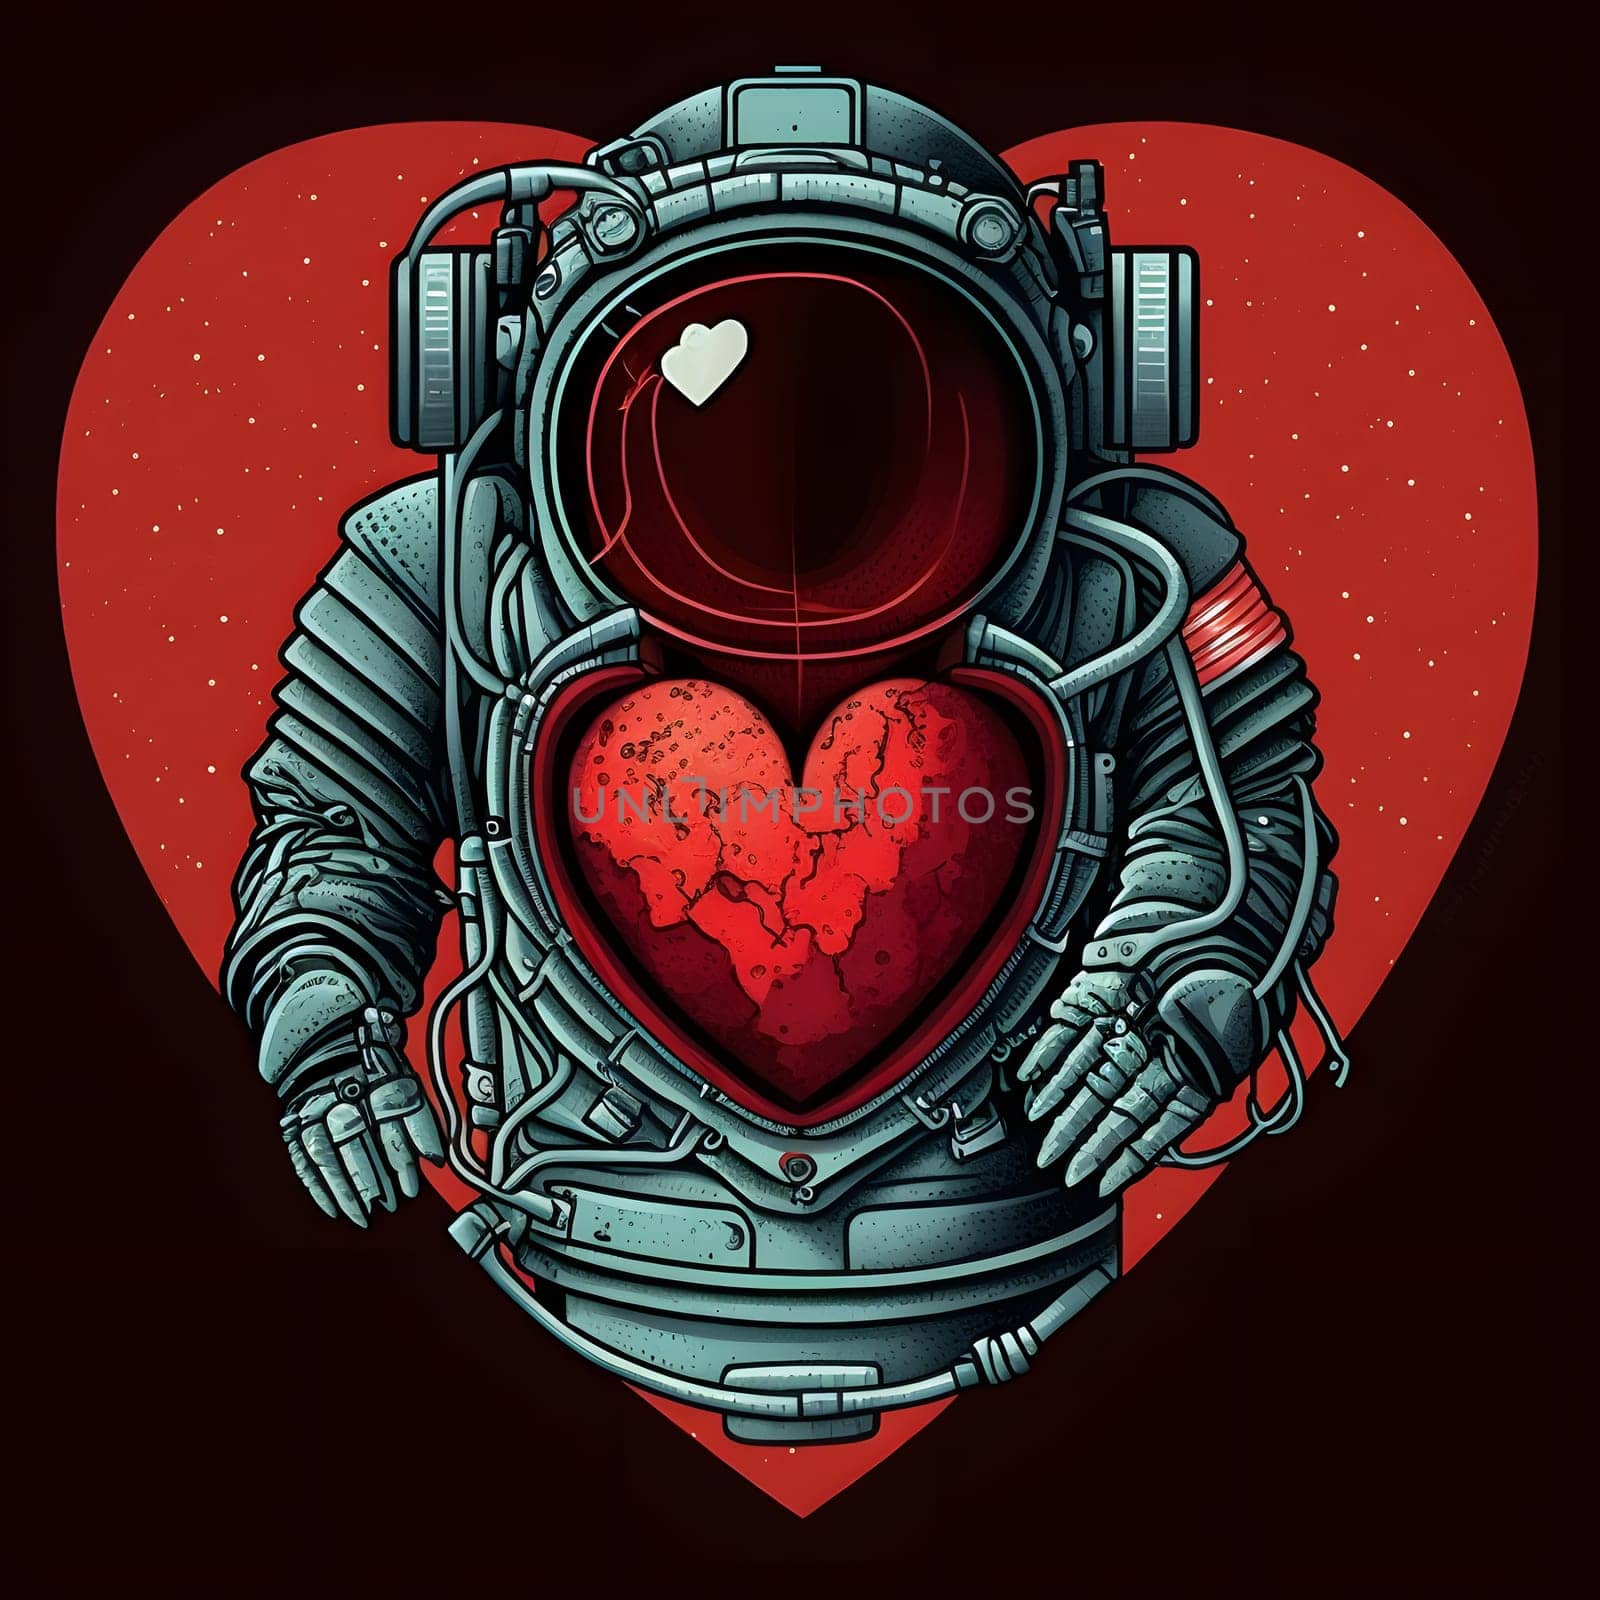 space suit with large red heart in center - nasa syle valentines day logo, neural network generated art by z1b